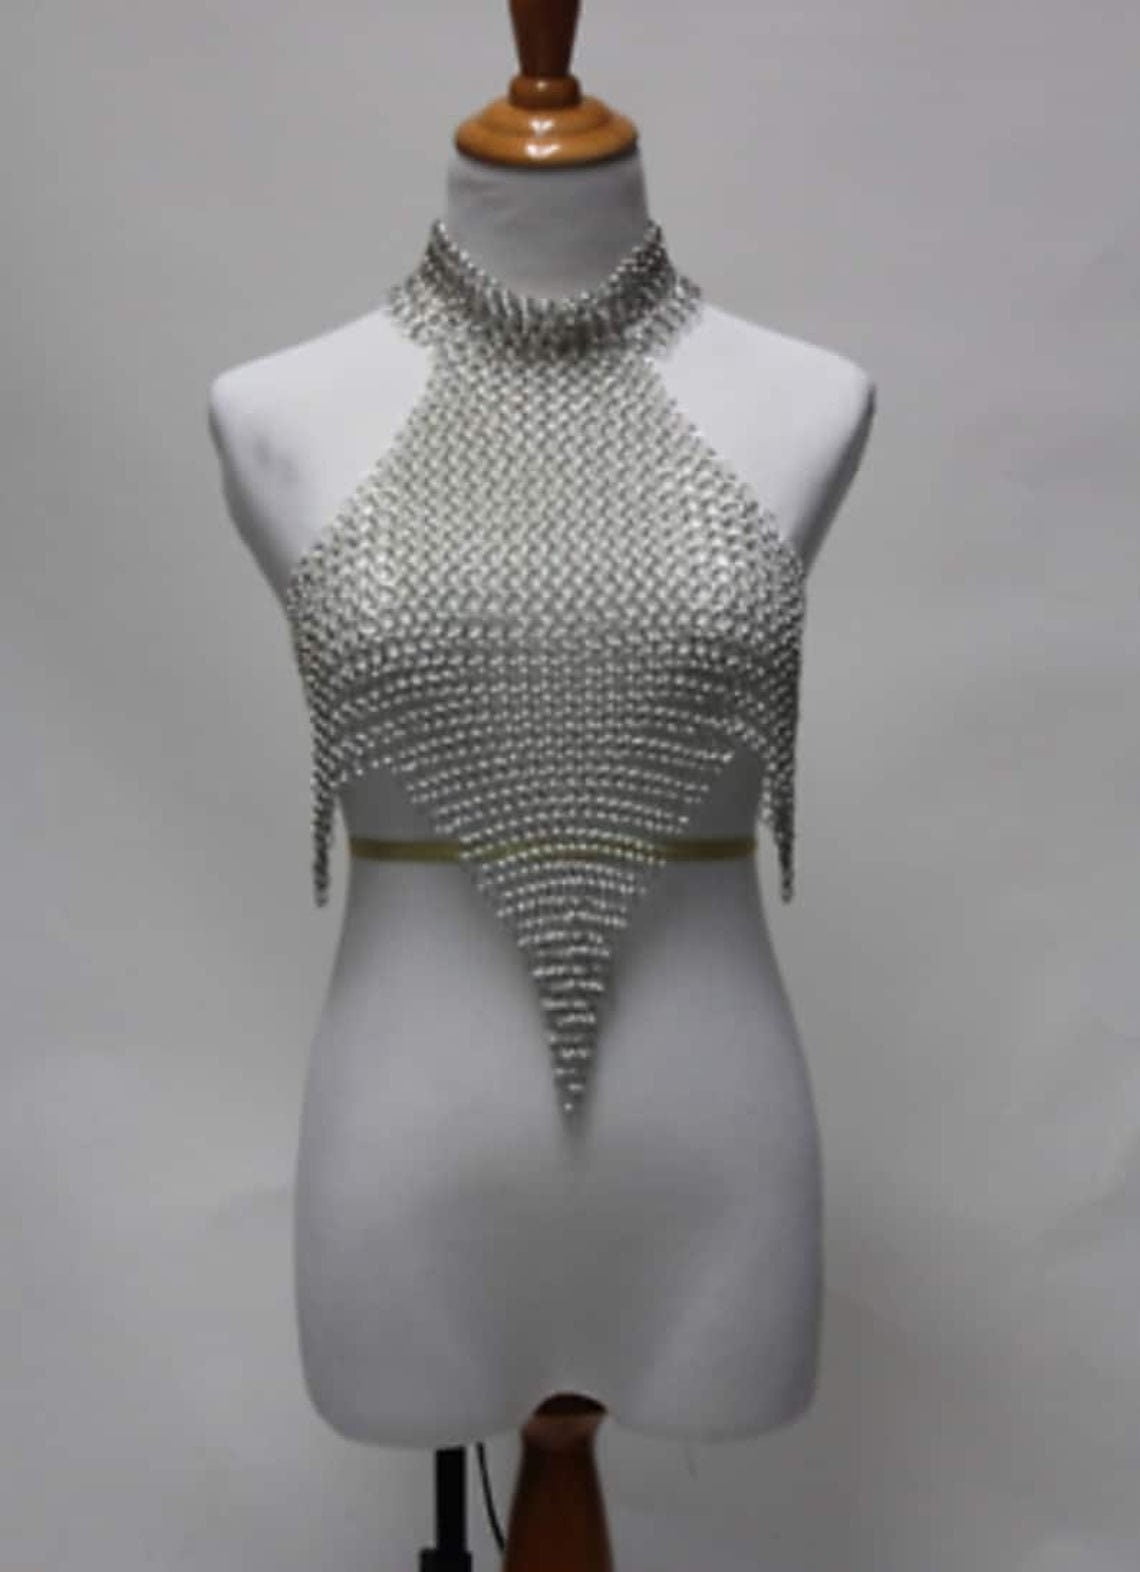 CHAINMAIL Shirt women's chainmail armor best gift for girlfriend